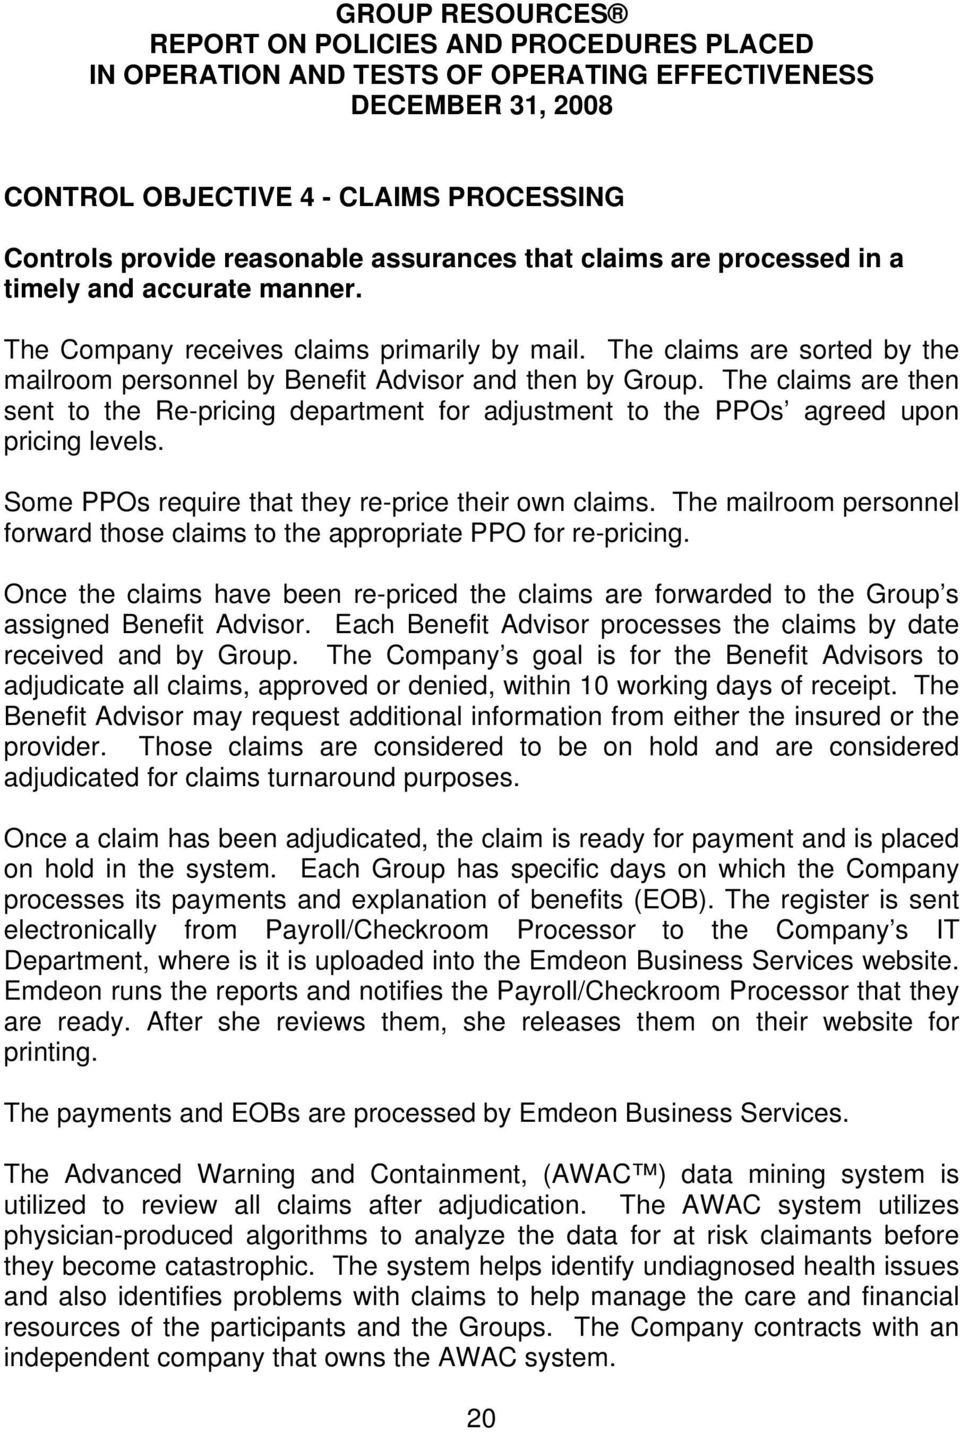 Some PPOs require that they re-price their own claims. The mailroom personnel forward those claims to the appropriate PPO for re-pricing.